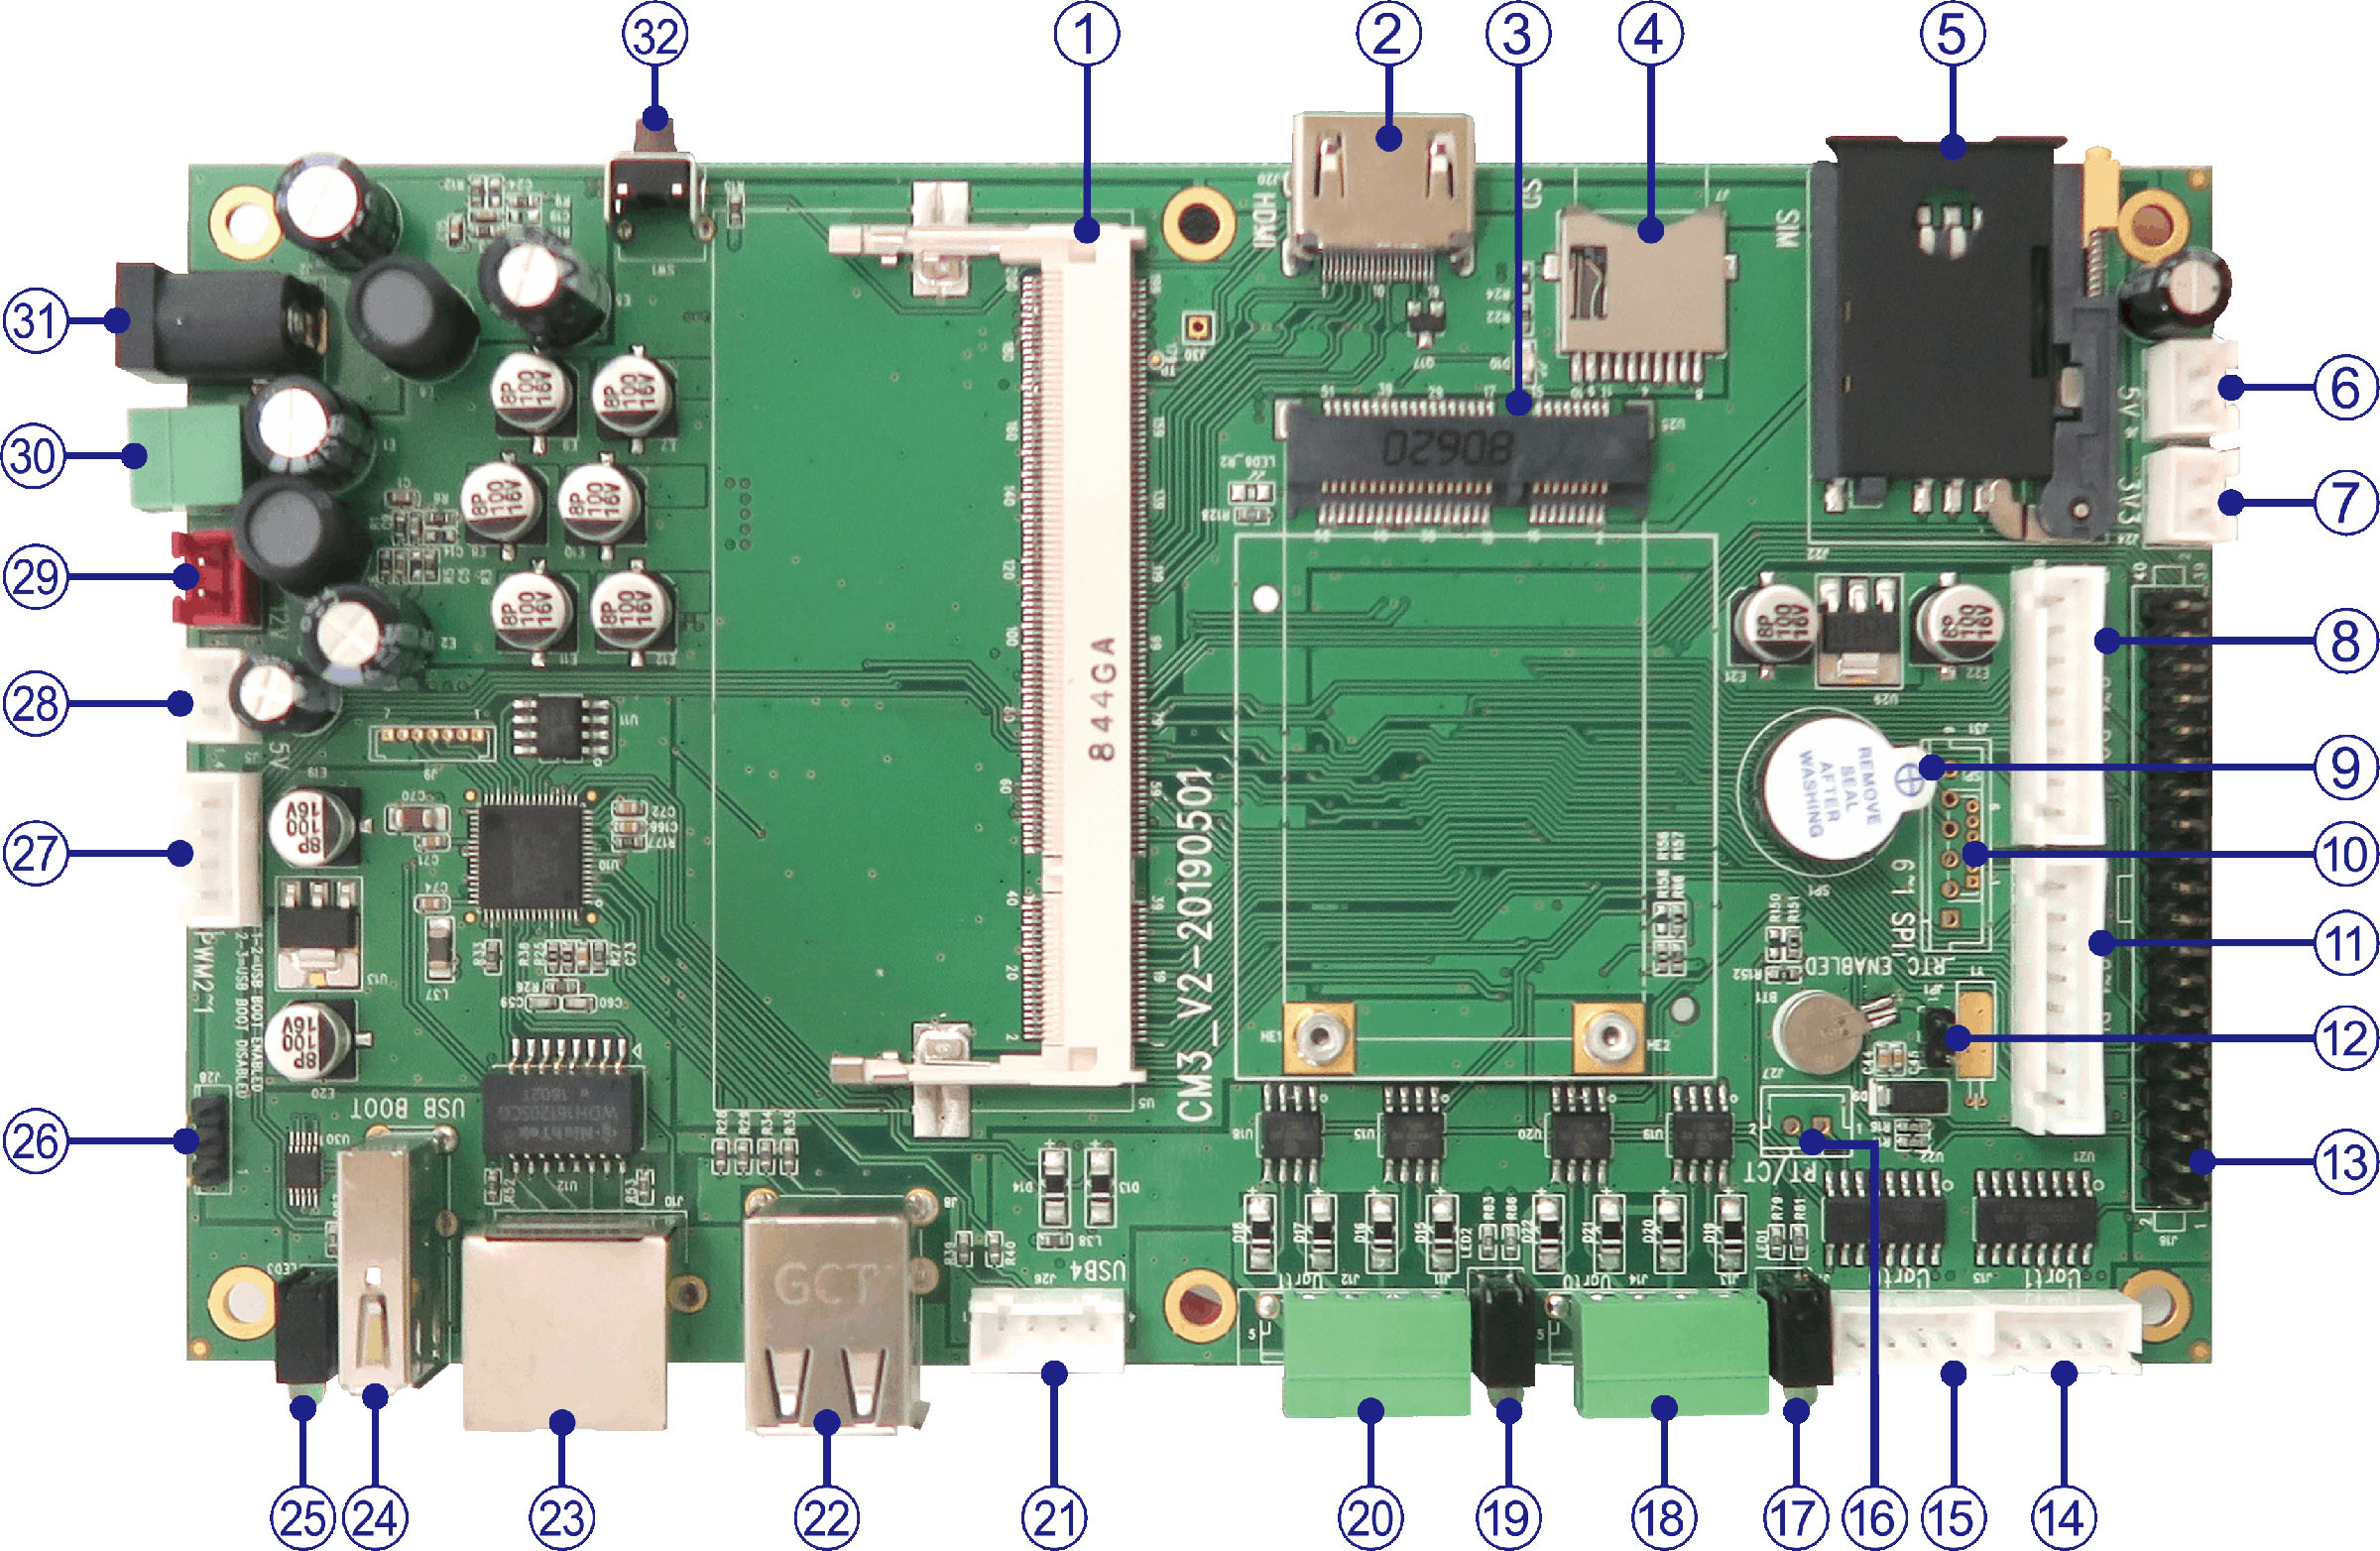 PiCAN2 - Duo CAN-Bus Board for Raspberry Pi 2